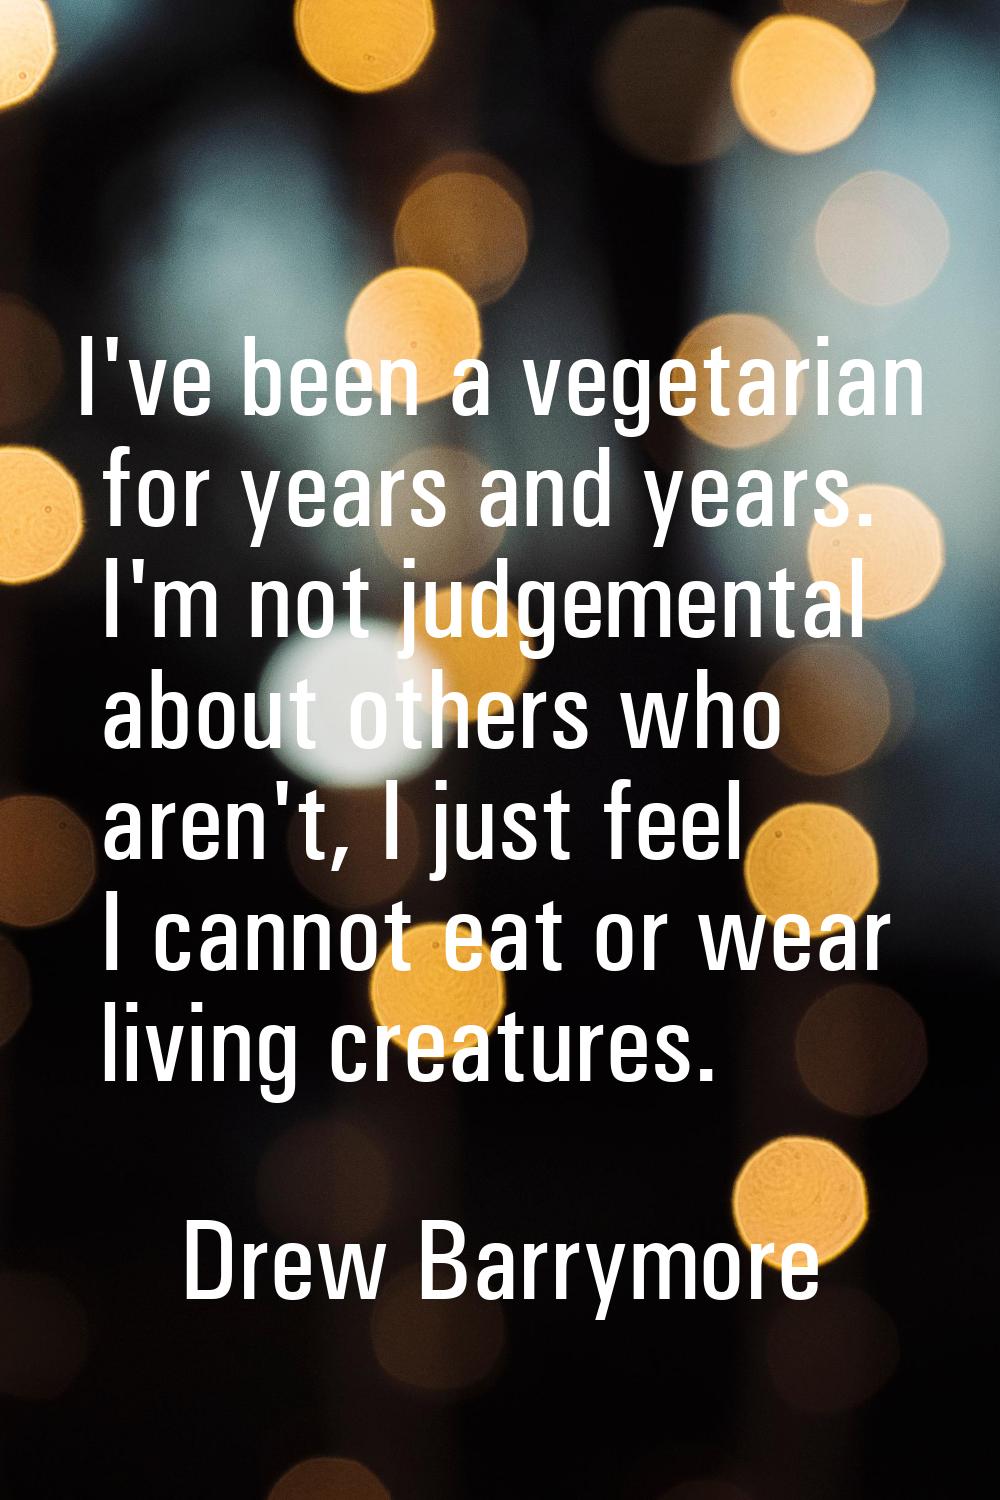 I've been a vegetarian for years and years. I'm not judgemental about others who aren't, I just fee